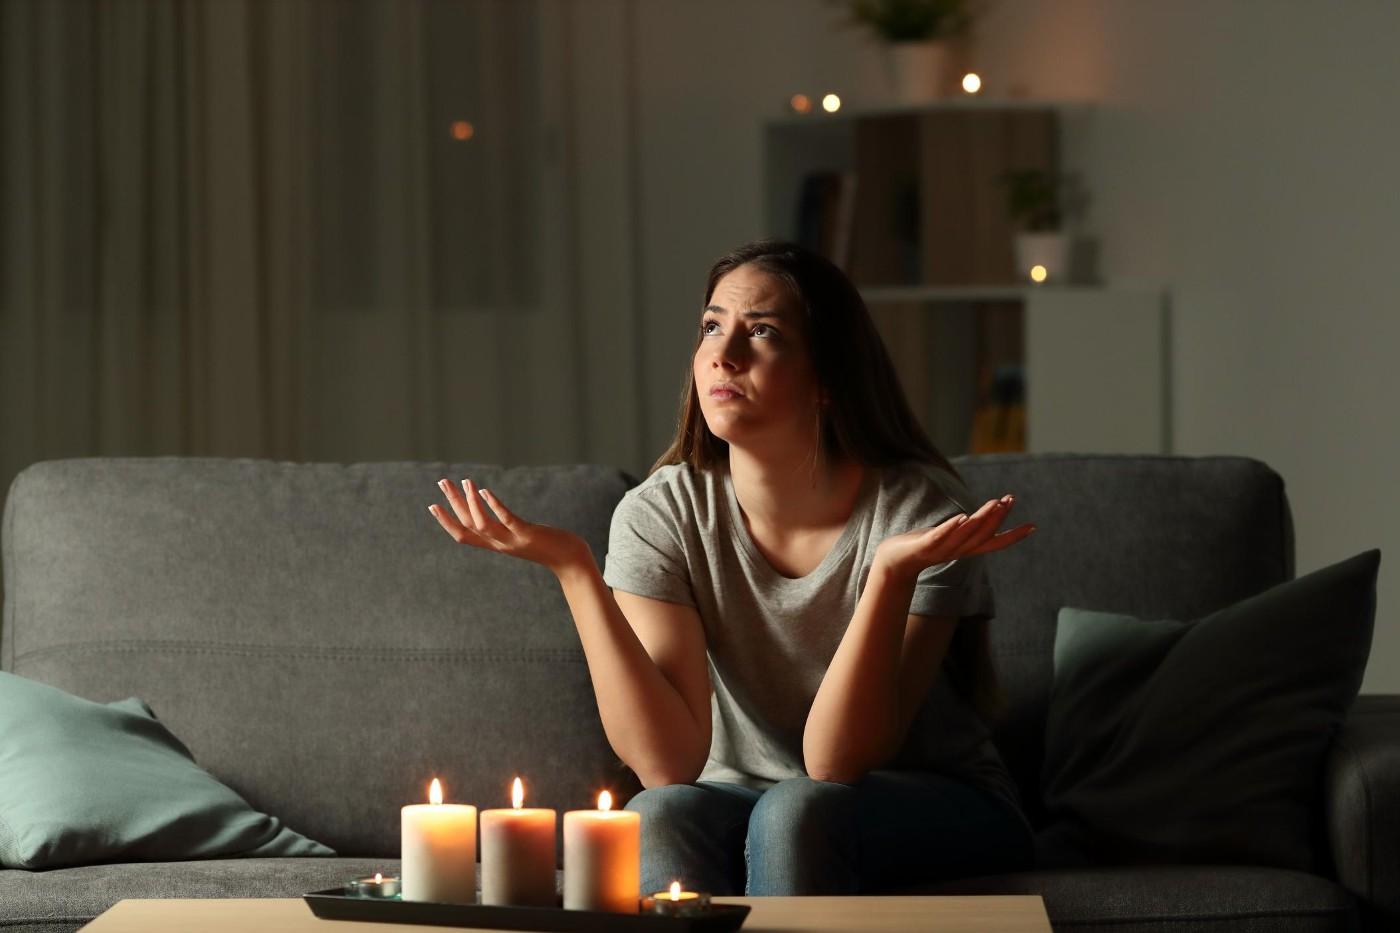 woman sitting on couch with lit candles during outage